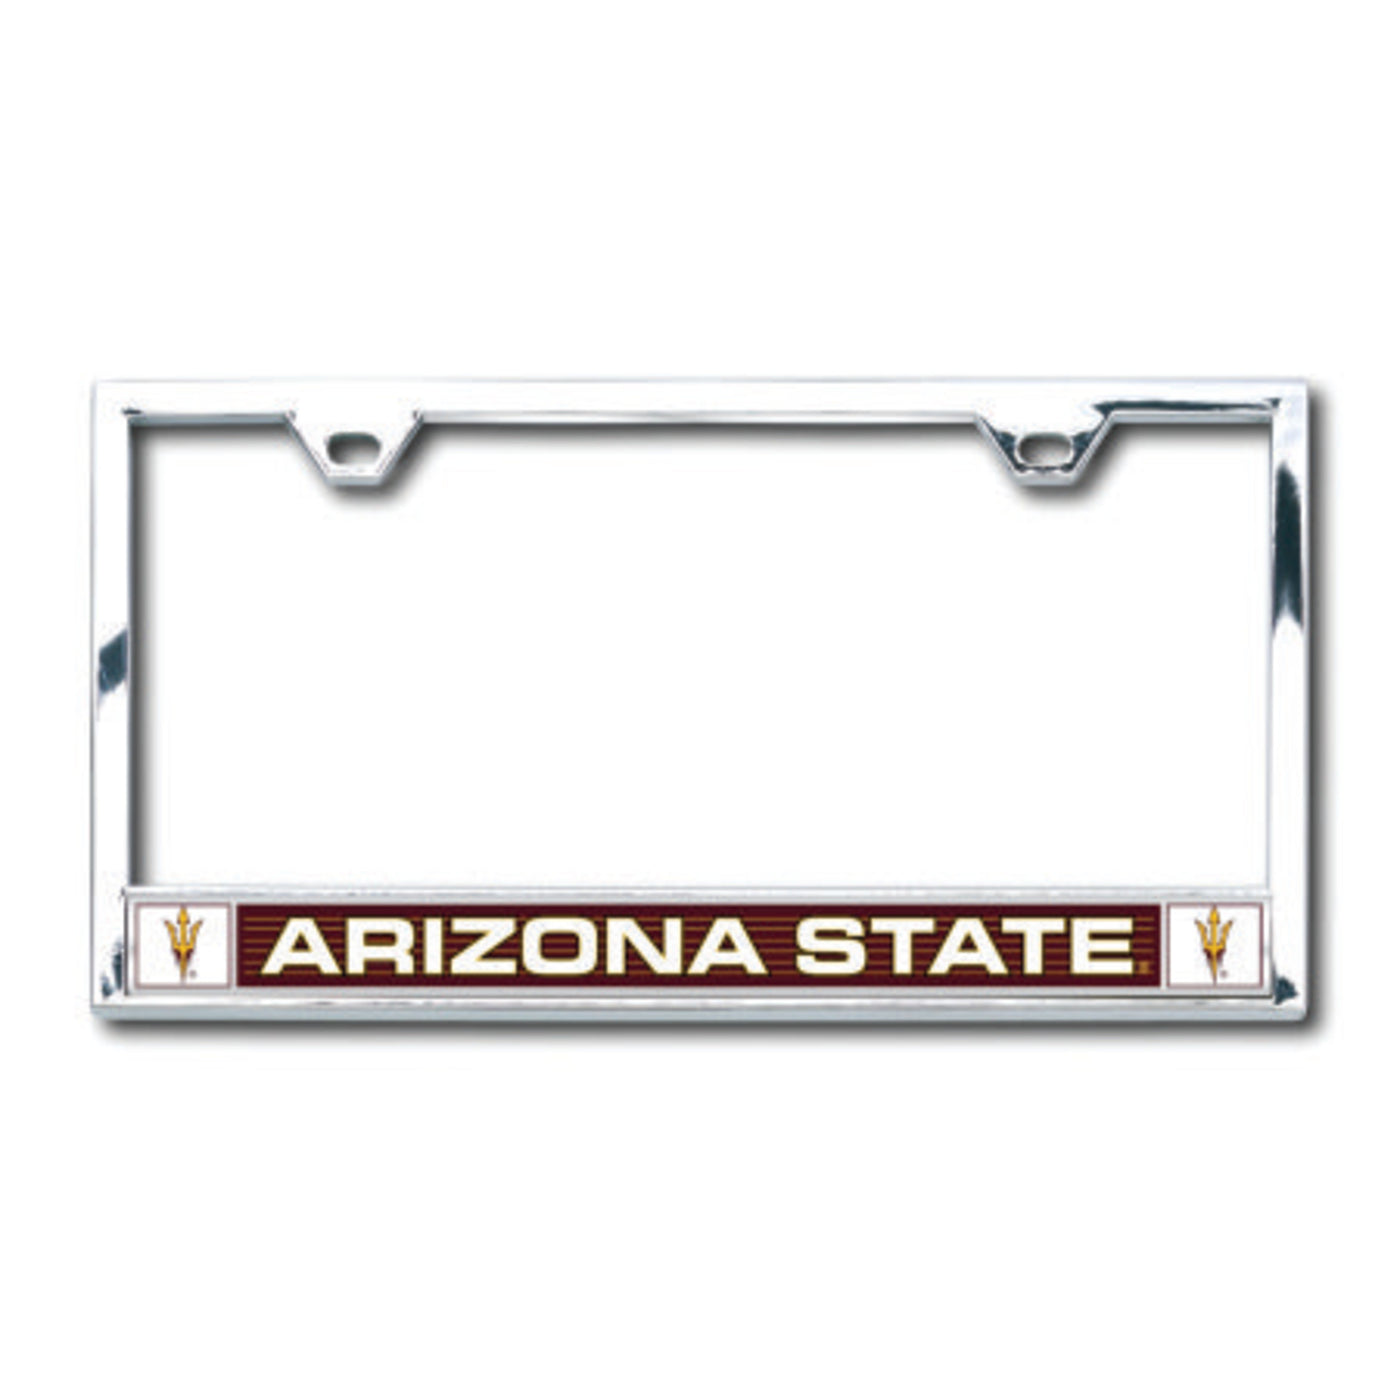 ASU license plate frame with pitchforks on either side of 'Arizona State' lettering with a maroon band